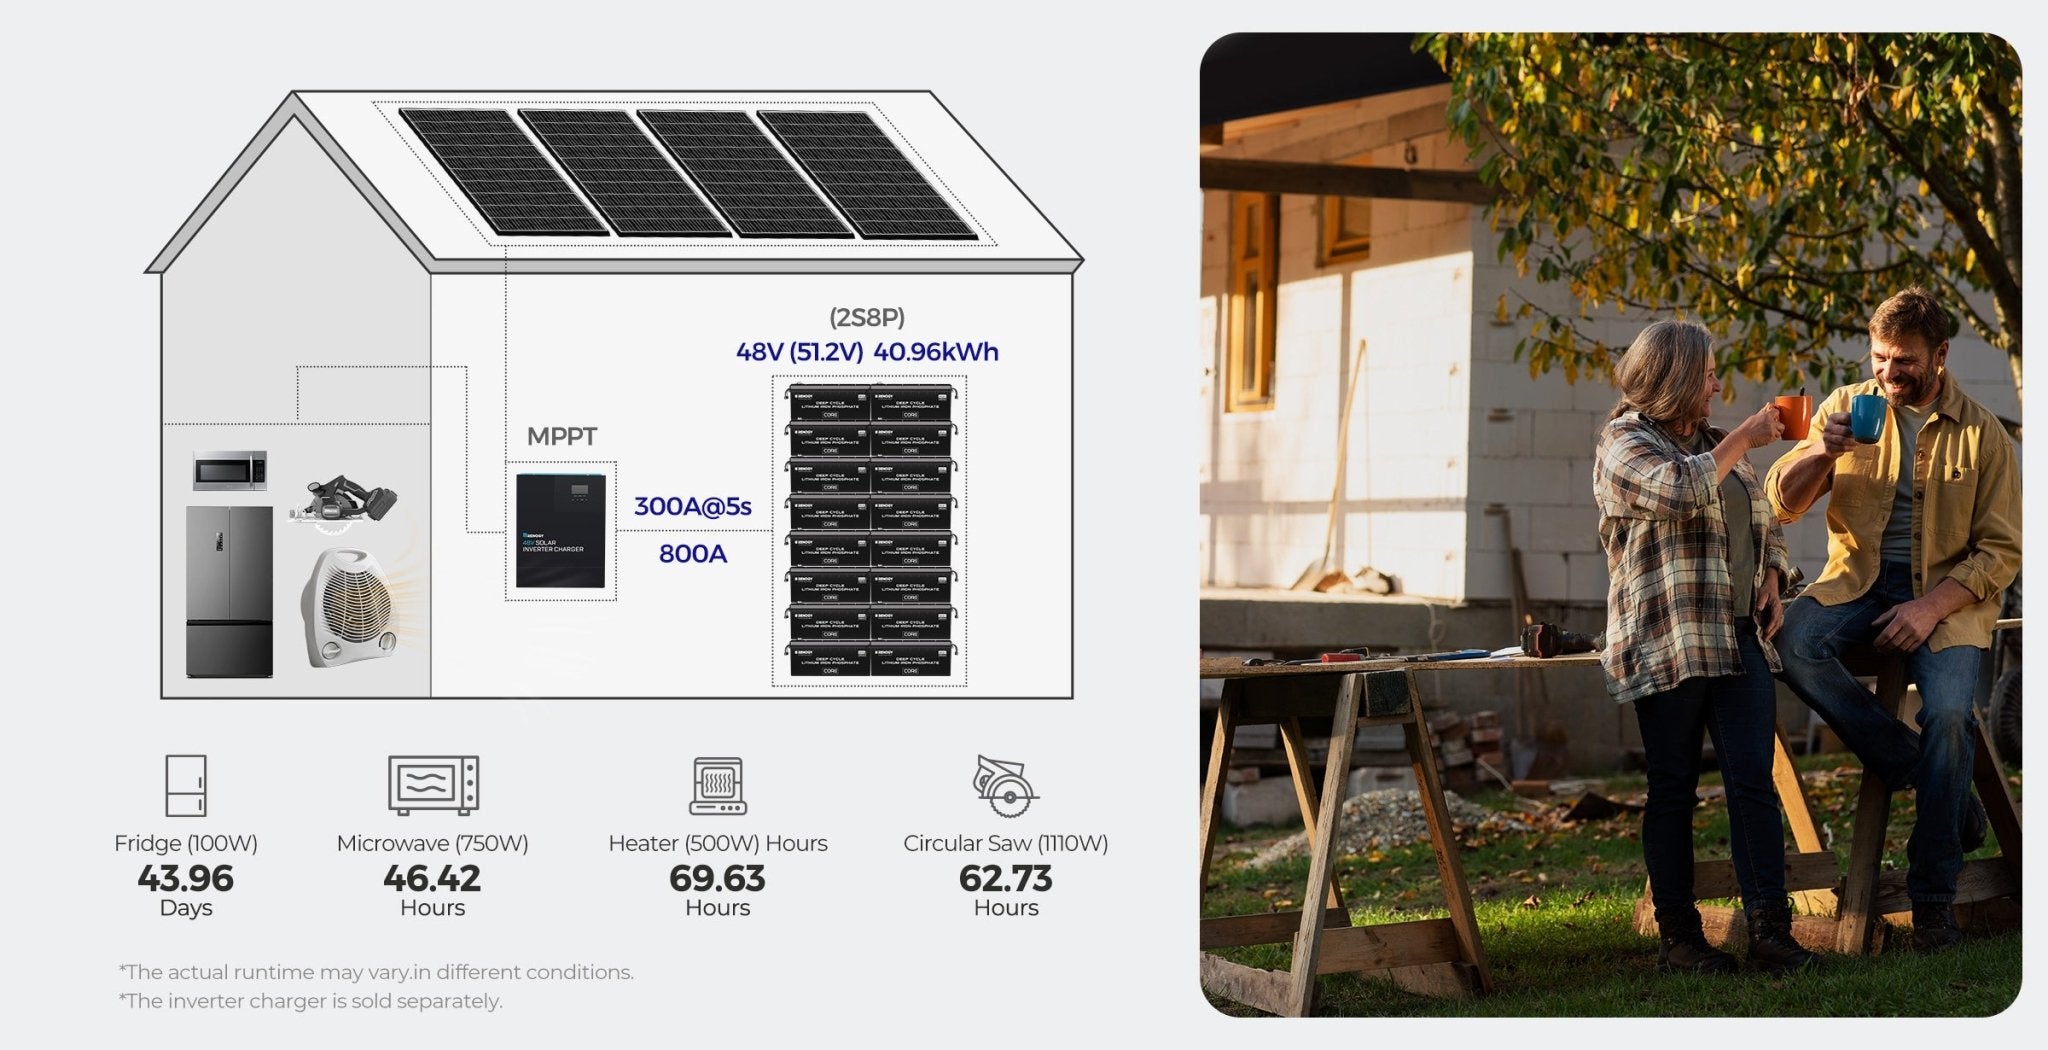 Renogy 24V 100Ah Core Series Deep Cycle Lithium Iron Phosphate Battery - Solar Generators and Power Stations Plus